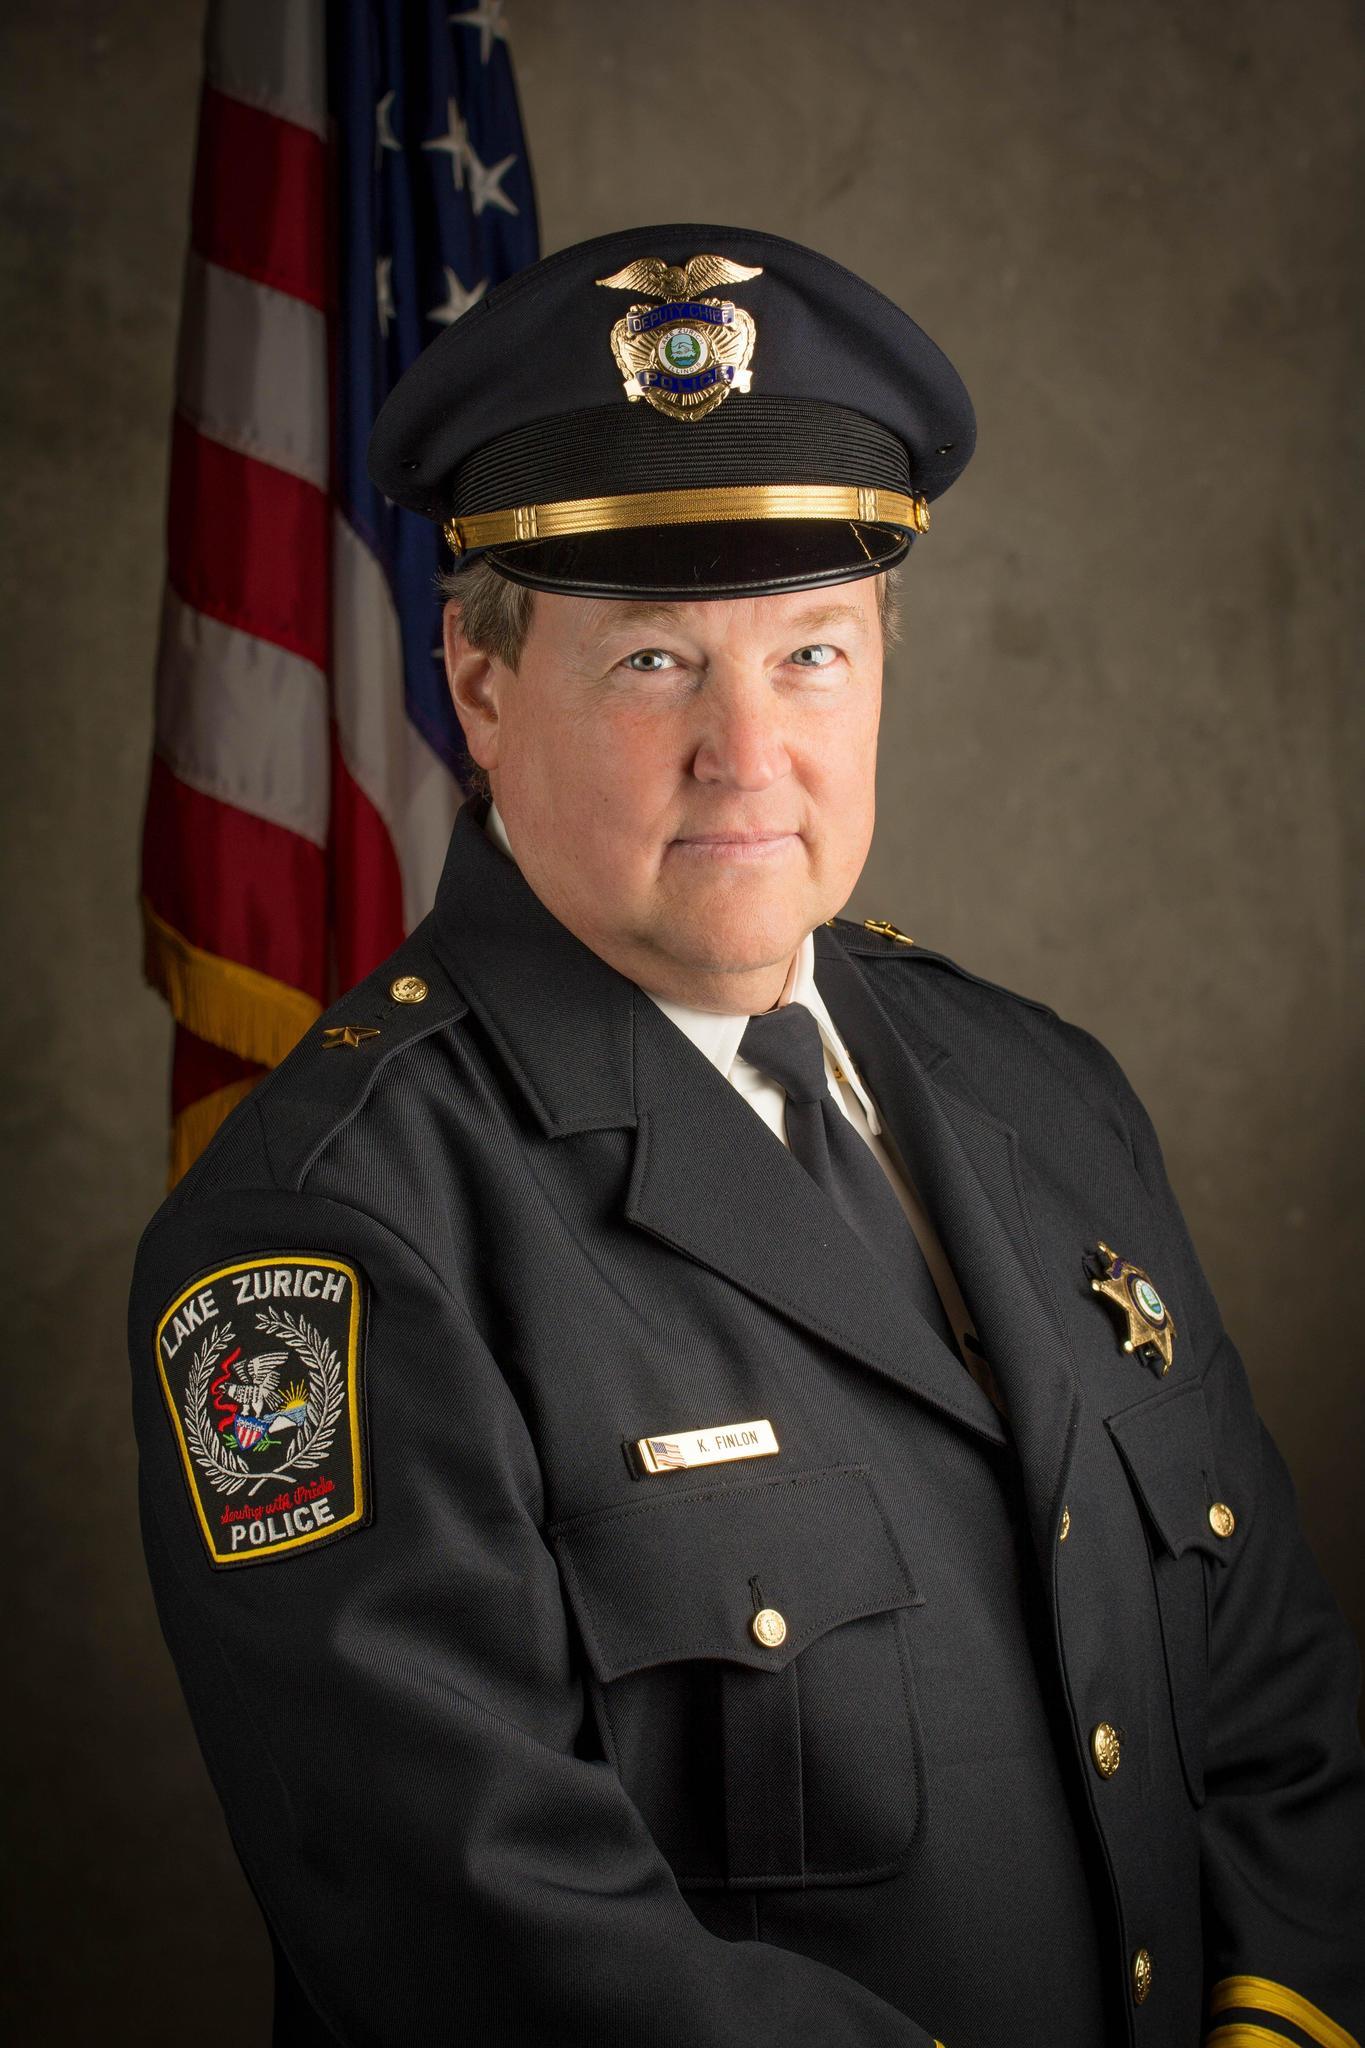 Retiring deputy chief reflects on dream career with Lake Zurich police